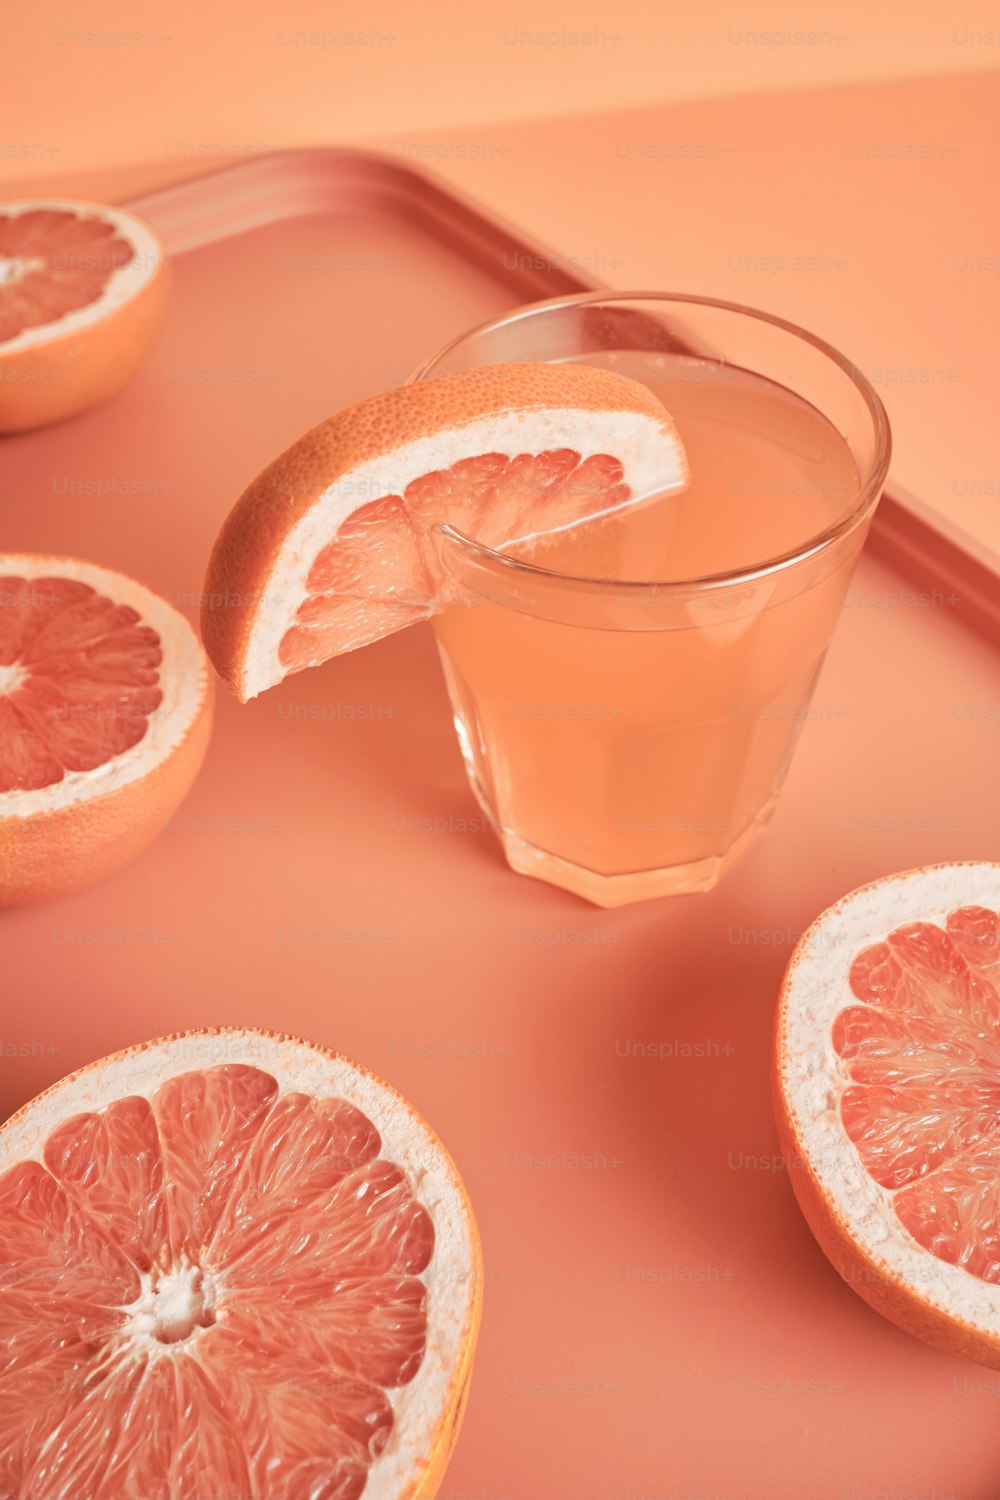 grapefruit slices and a glass of water on a tray